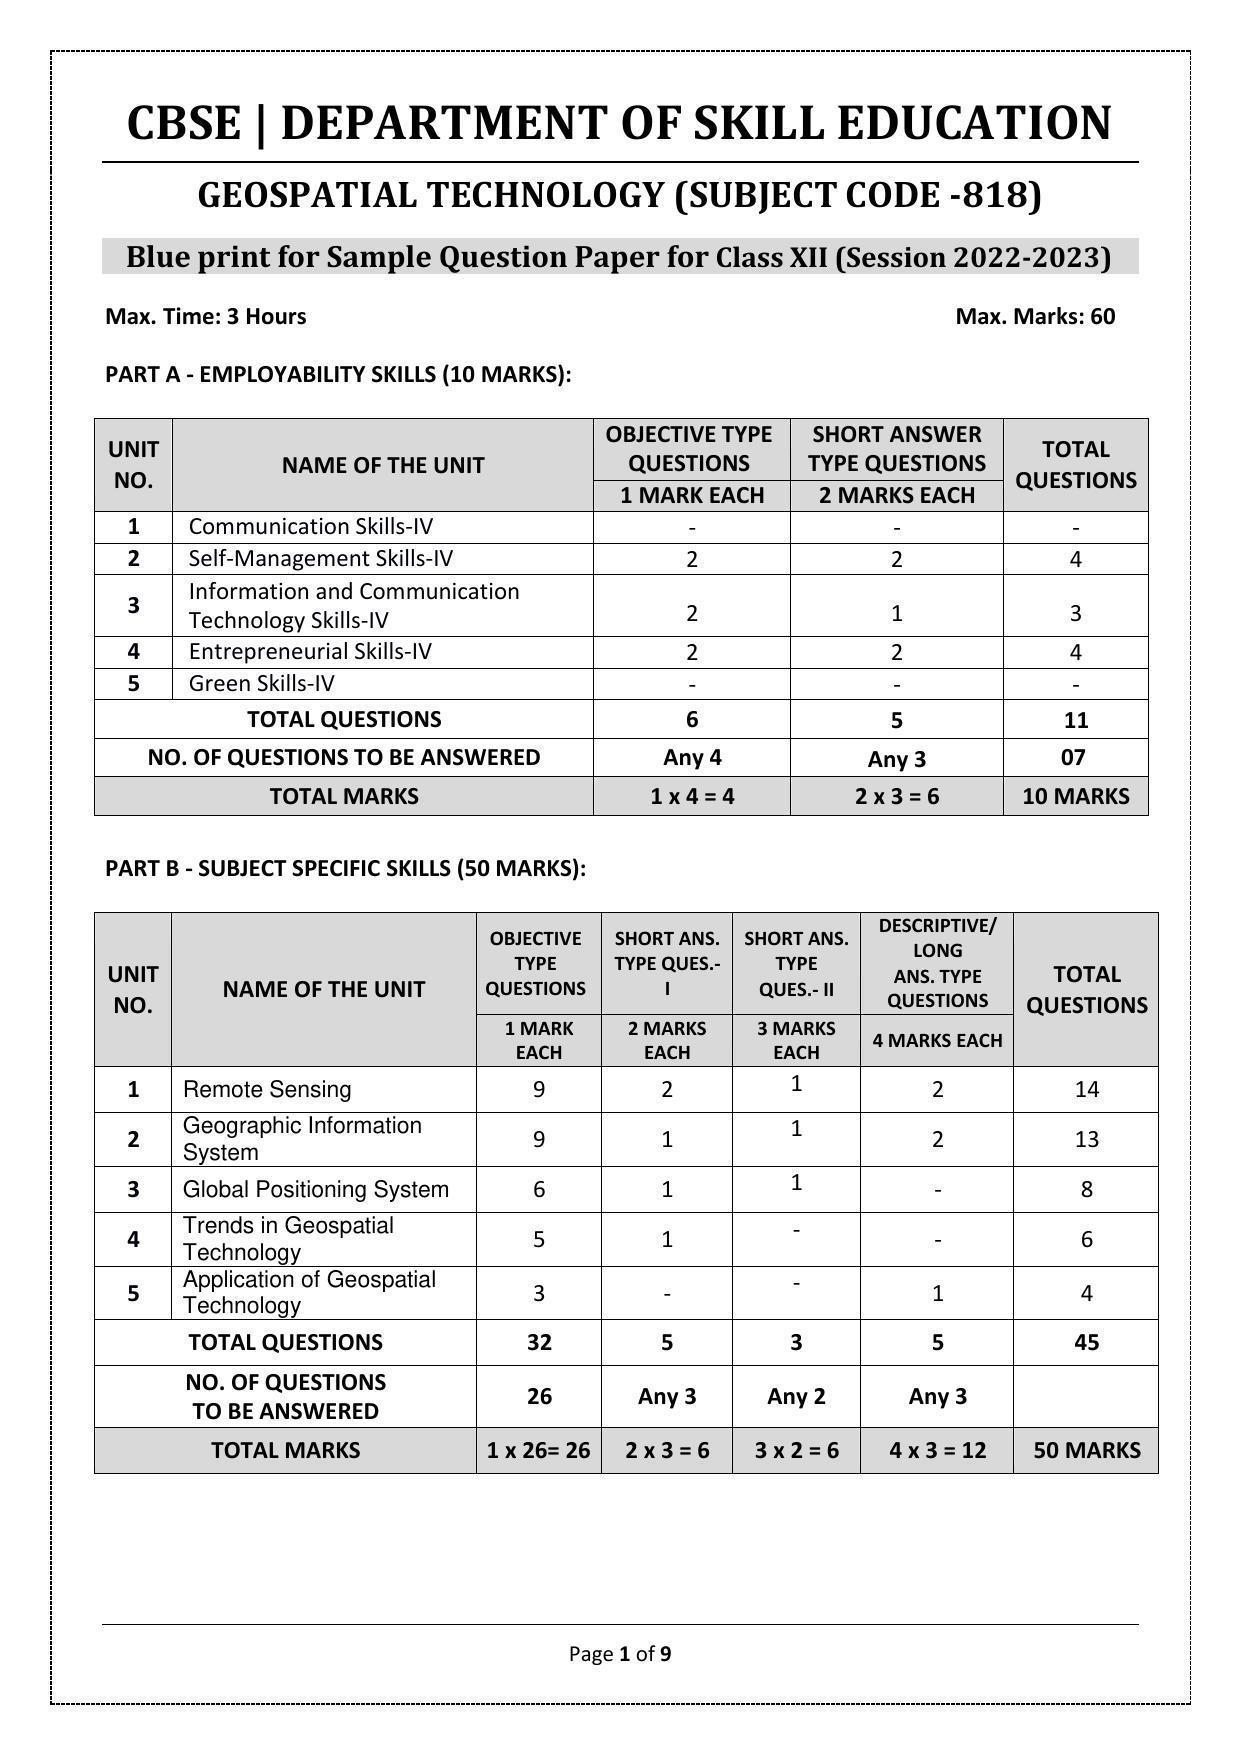 CBSE Class 10 Geospatial Technology (Skill Education) Sample Papers 2023 - Page 1